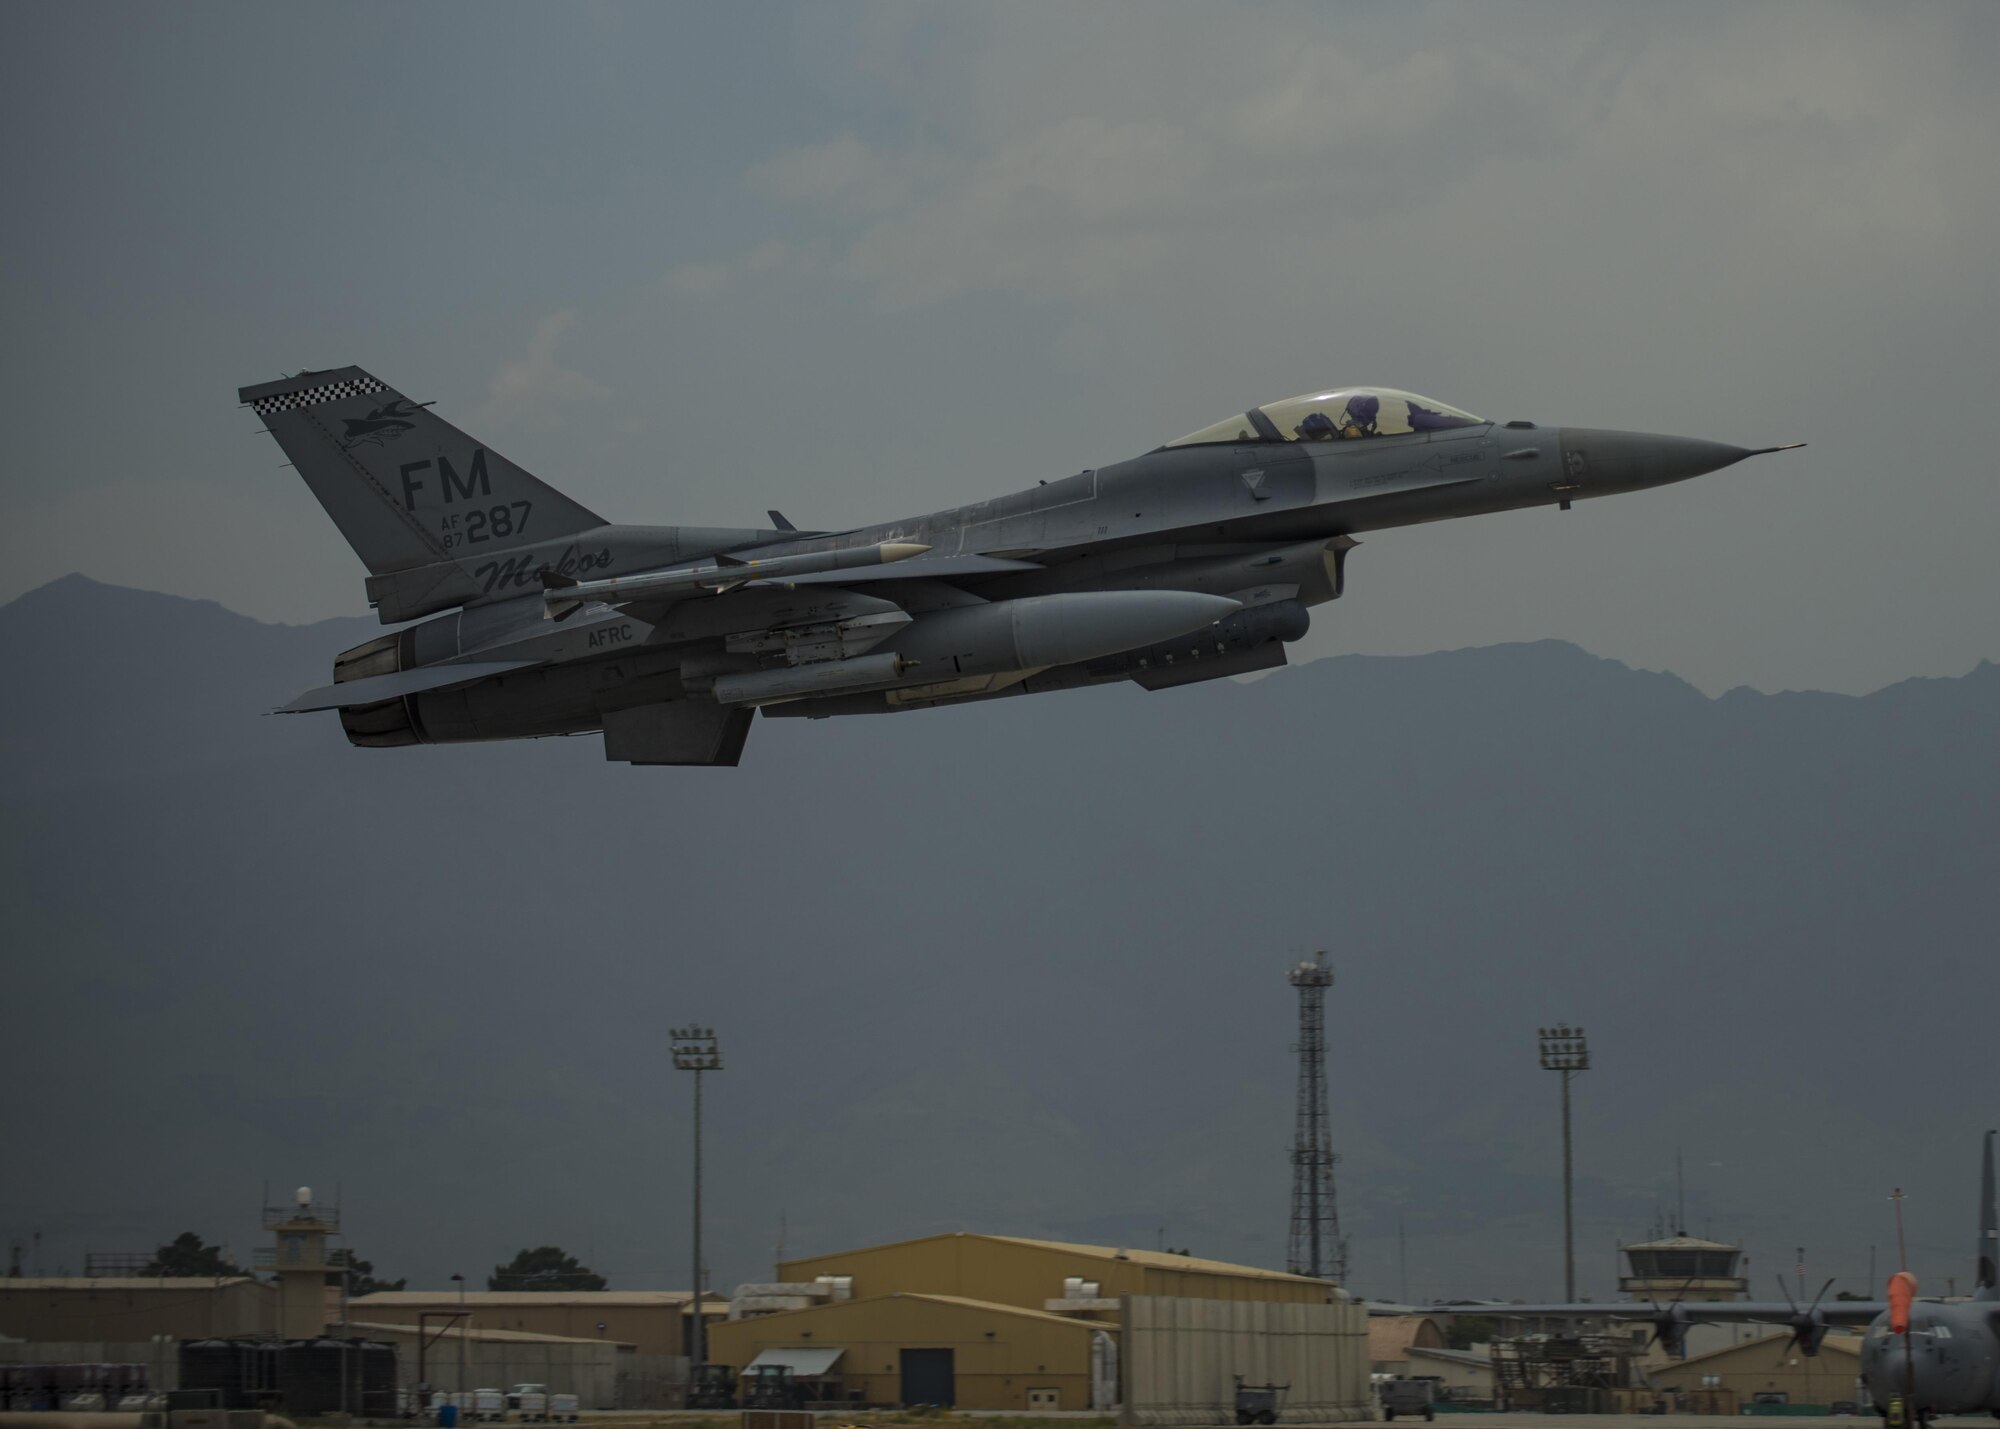 Lt. Col. David Efferson, 457th Expeditionary Fighter Squadron commander, takes off in an F-16C Fighting Falcon, June 28, 2016, Bagram Airfield, Afghanistan. The 457th EFS is the Air Force Reserve Command unit out of Naval Air Station Fort Worth Joint Reserve Base, Texas who continuously supports Operation Freedom's Sentinel and the NATO Resolute Support mission. (U.S. Air Force photo by Senior Airman Justyn M. Freeman)